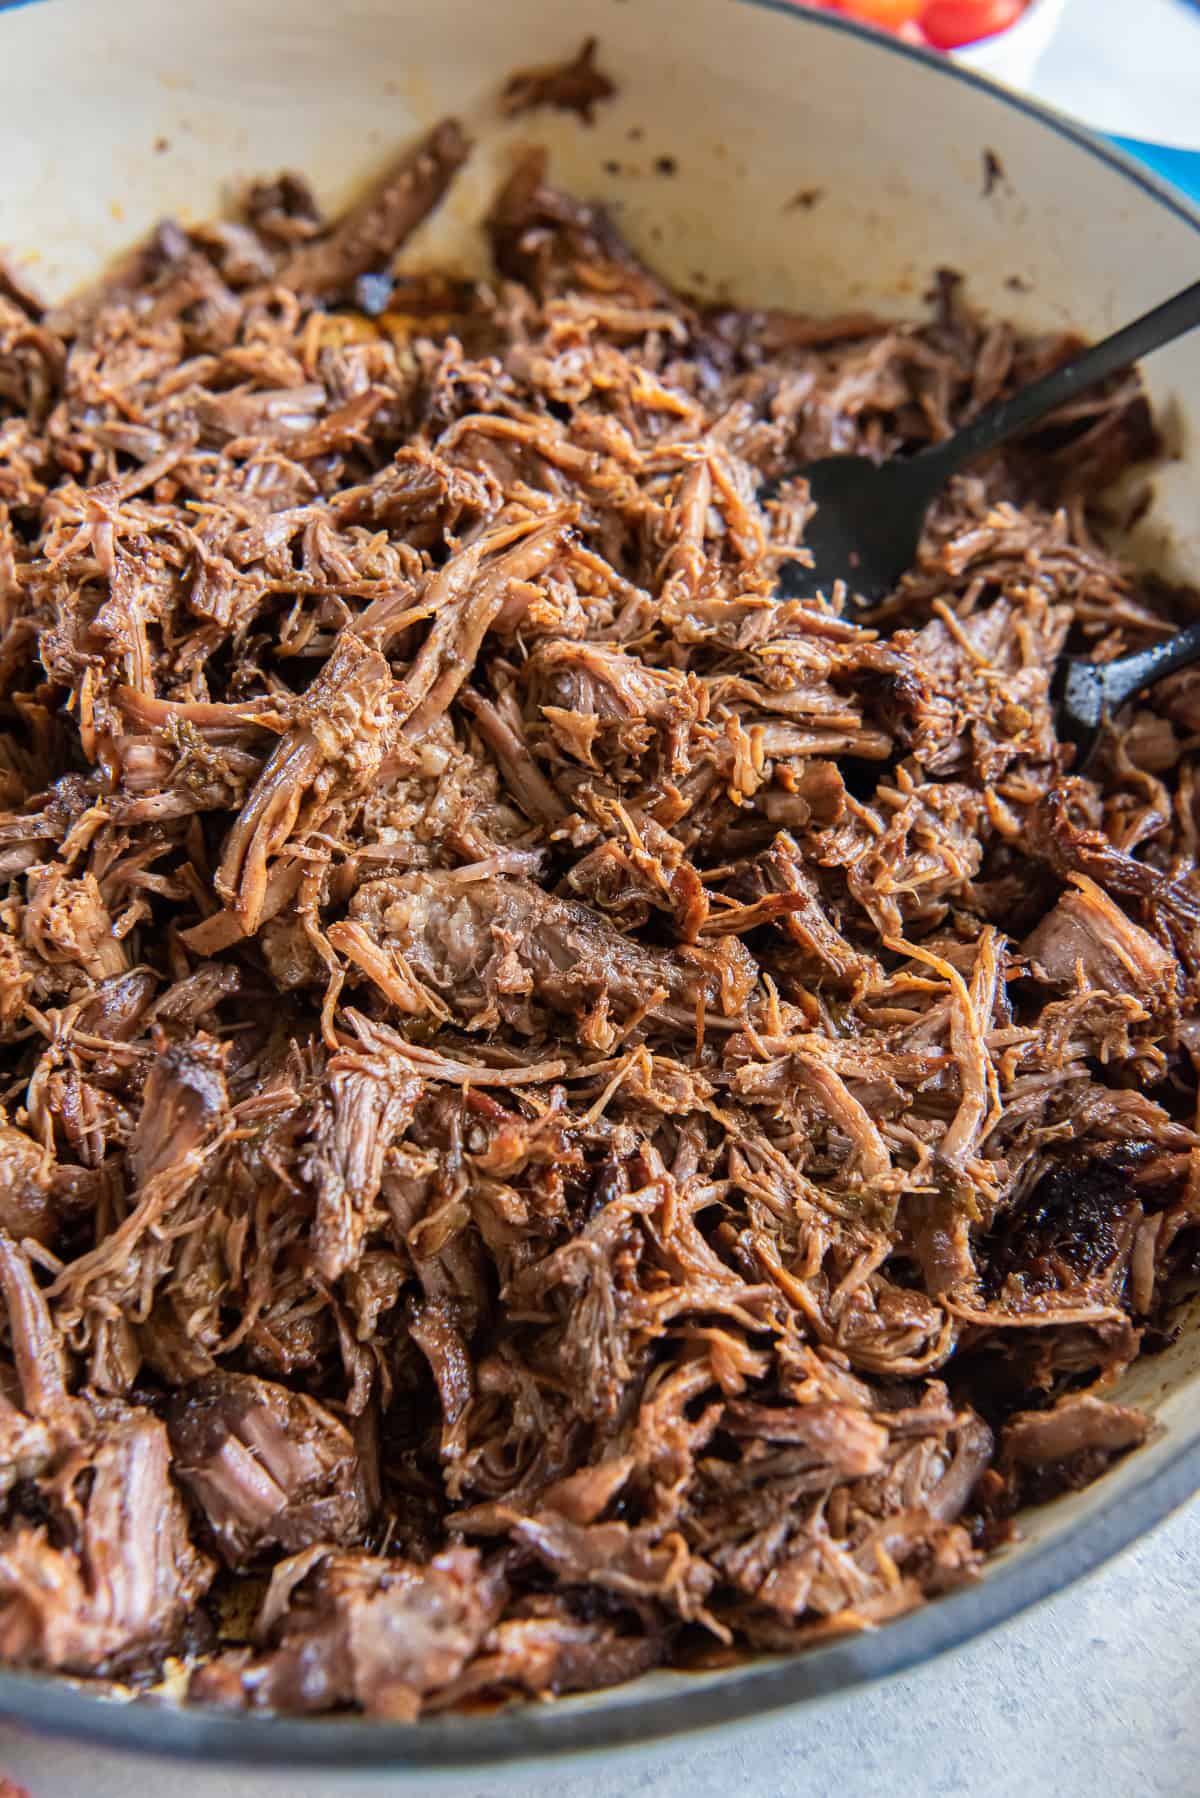 A close up of two forks resting in a pan full of shredded beef.